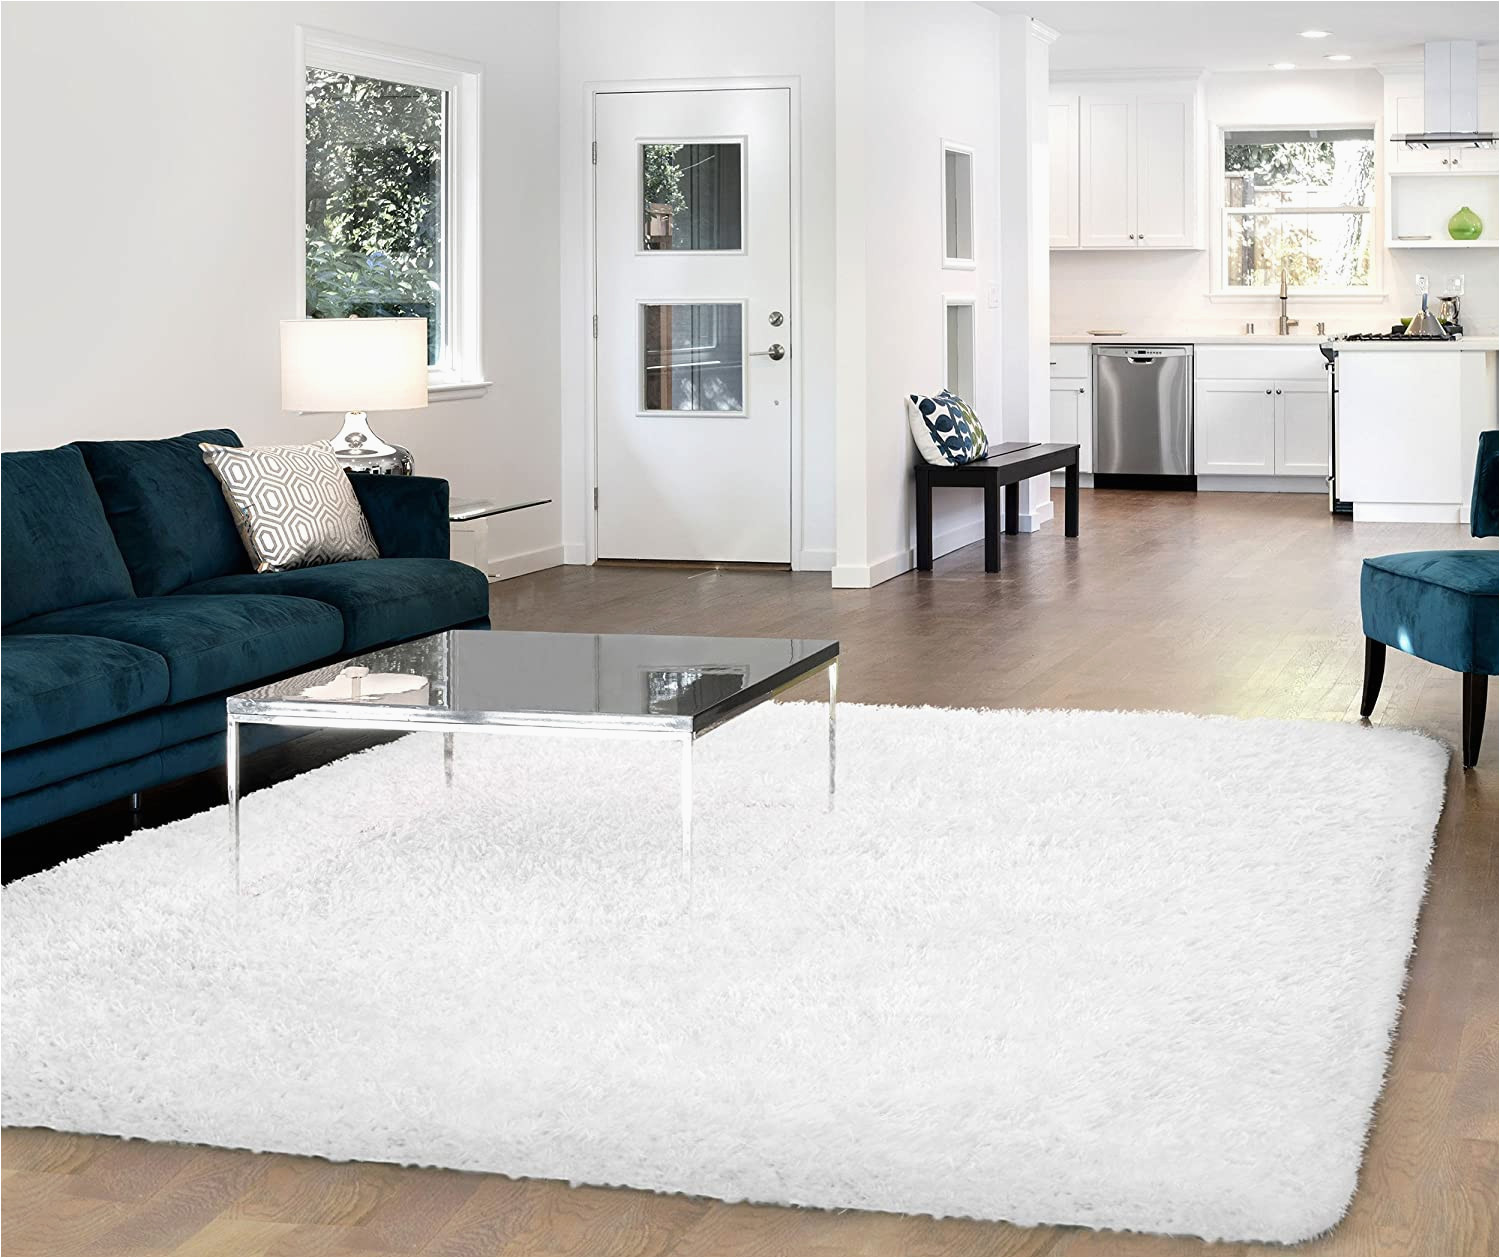 8ft X 10ft area Rugs Buy Vista Living Claudia Shag area Rug 8ft. X 10ft, White Online …